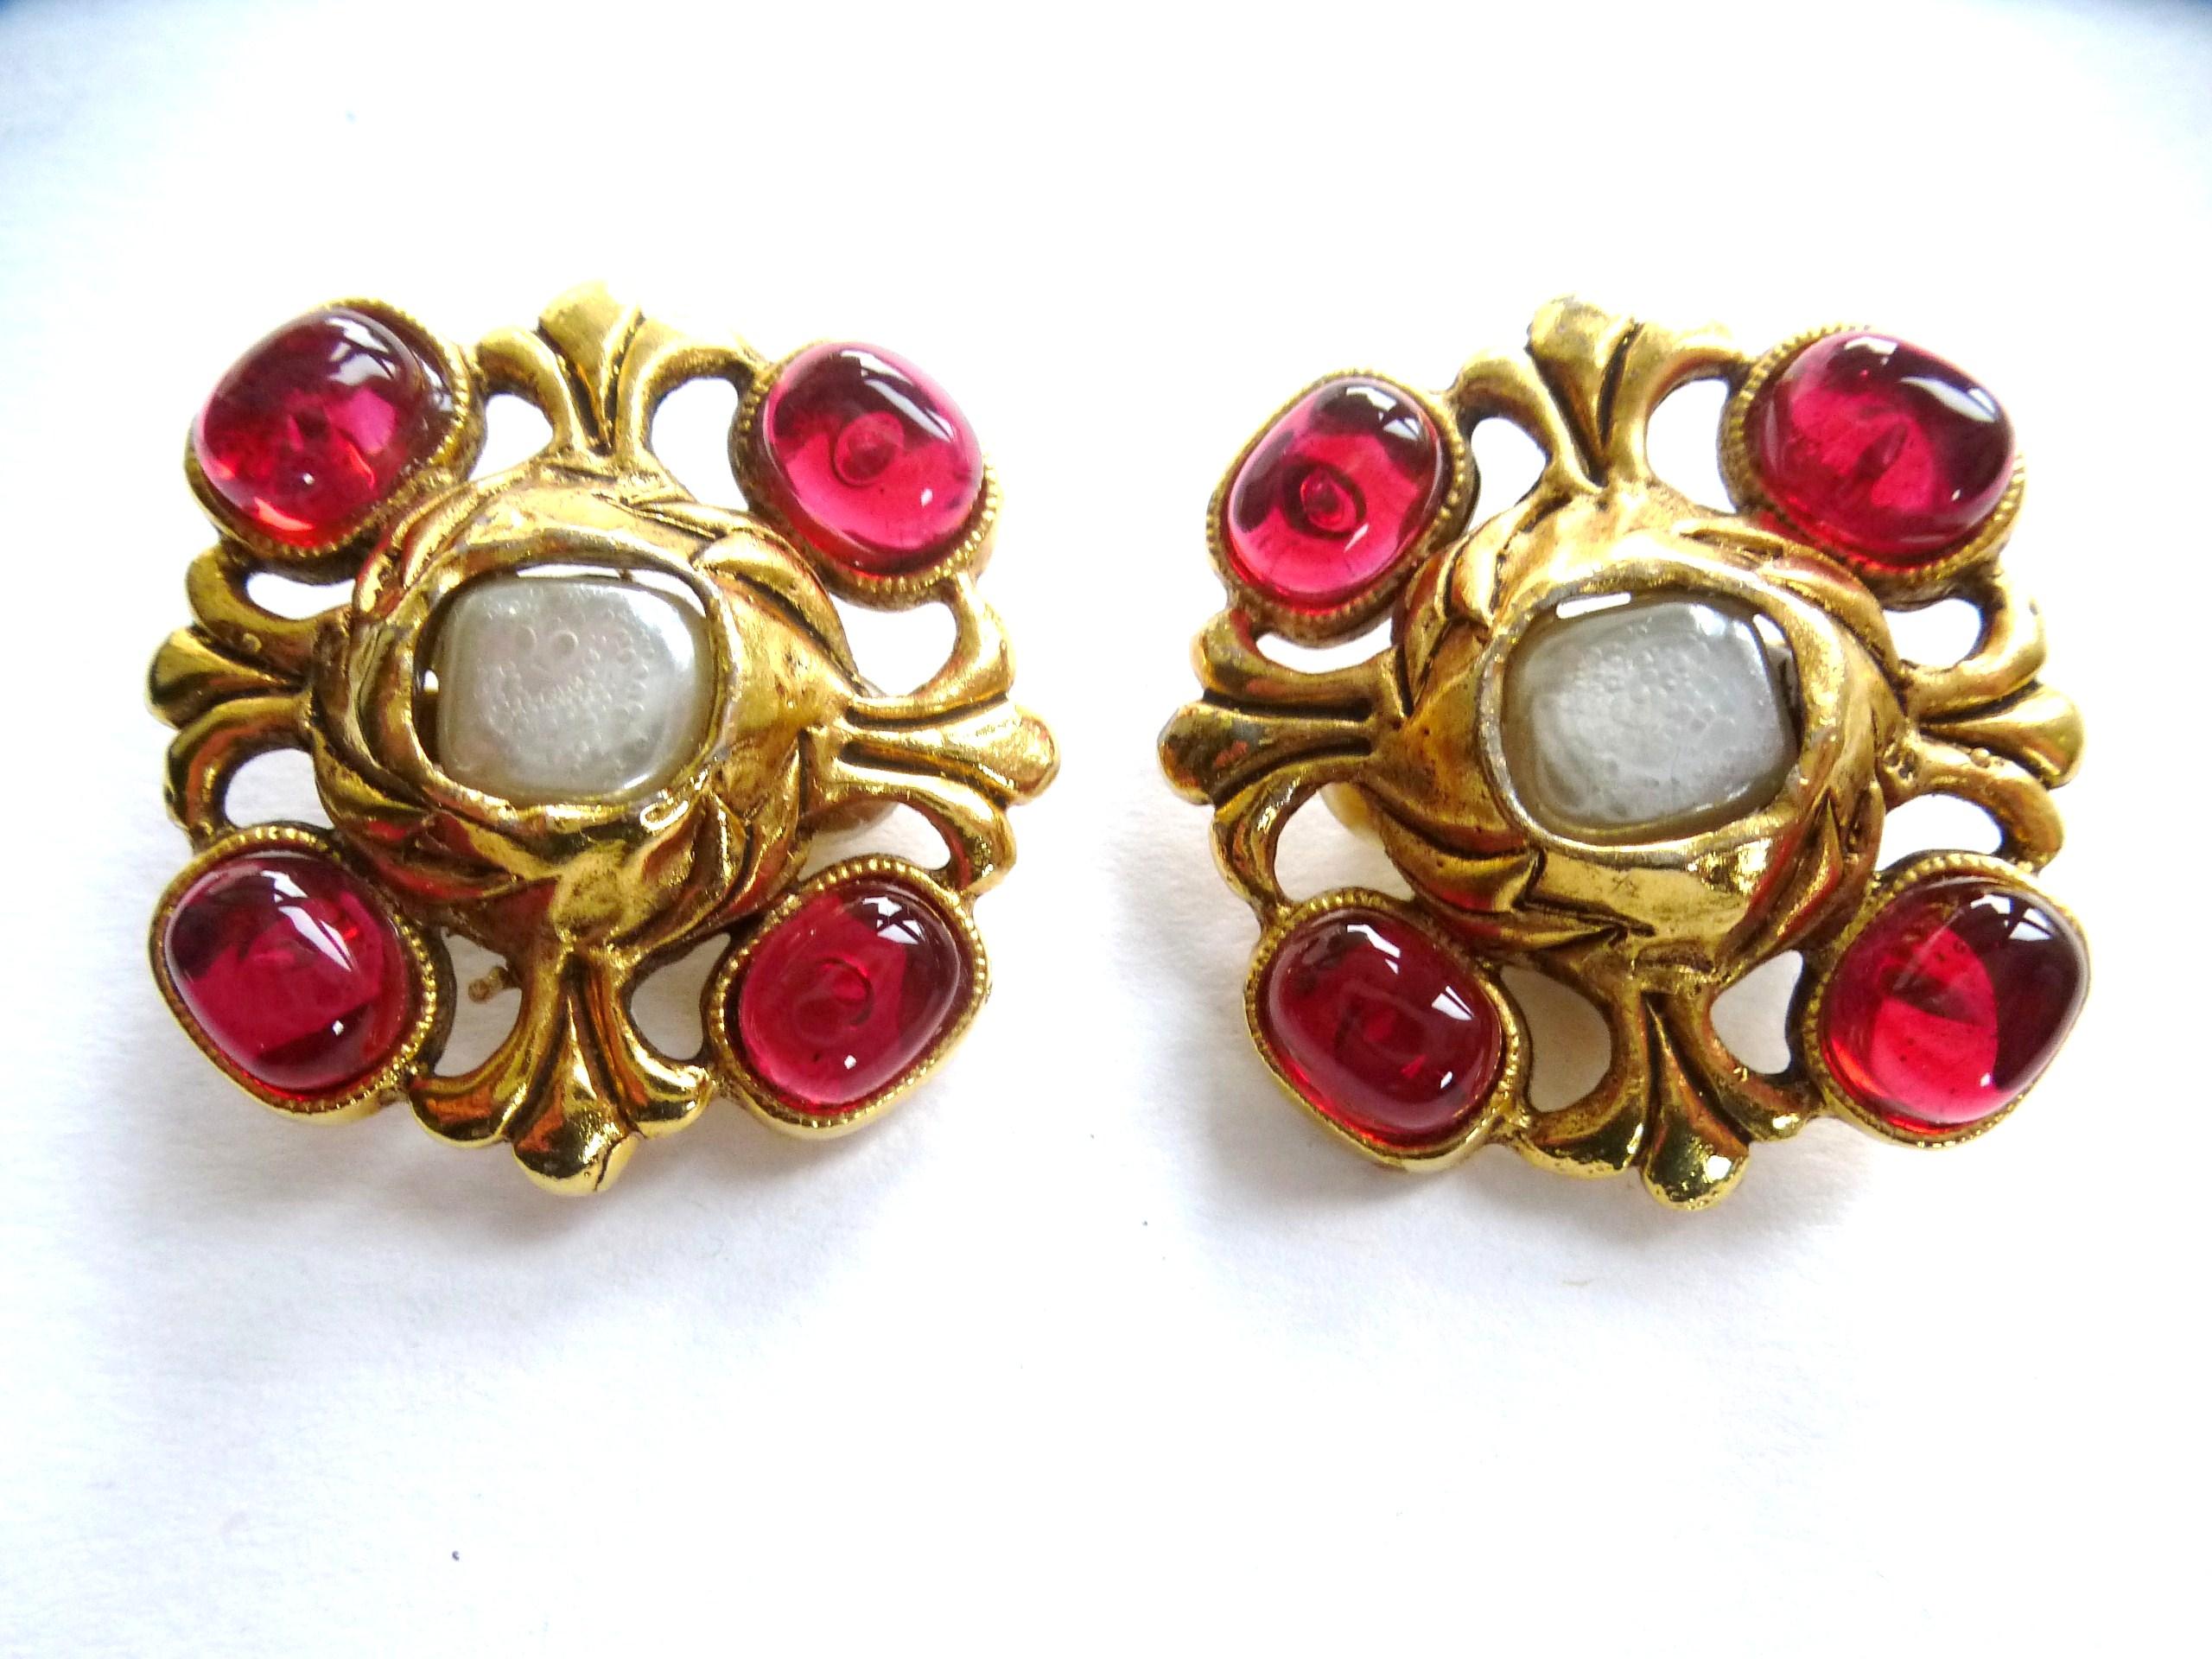 Unique Chanel ear clip with red gripoix and false pearls, 24 carat gold-plated from the 1985 years.
Measurement: 3 cm x 3 cm . Very good condition !